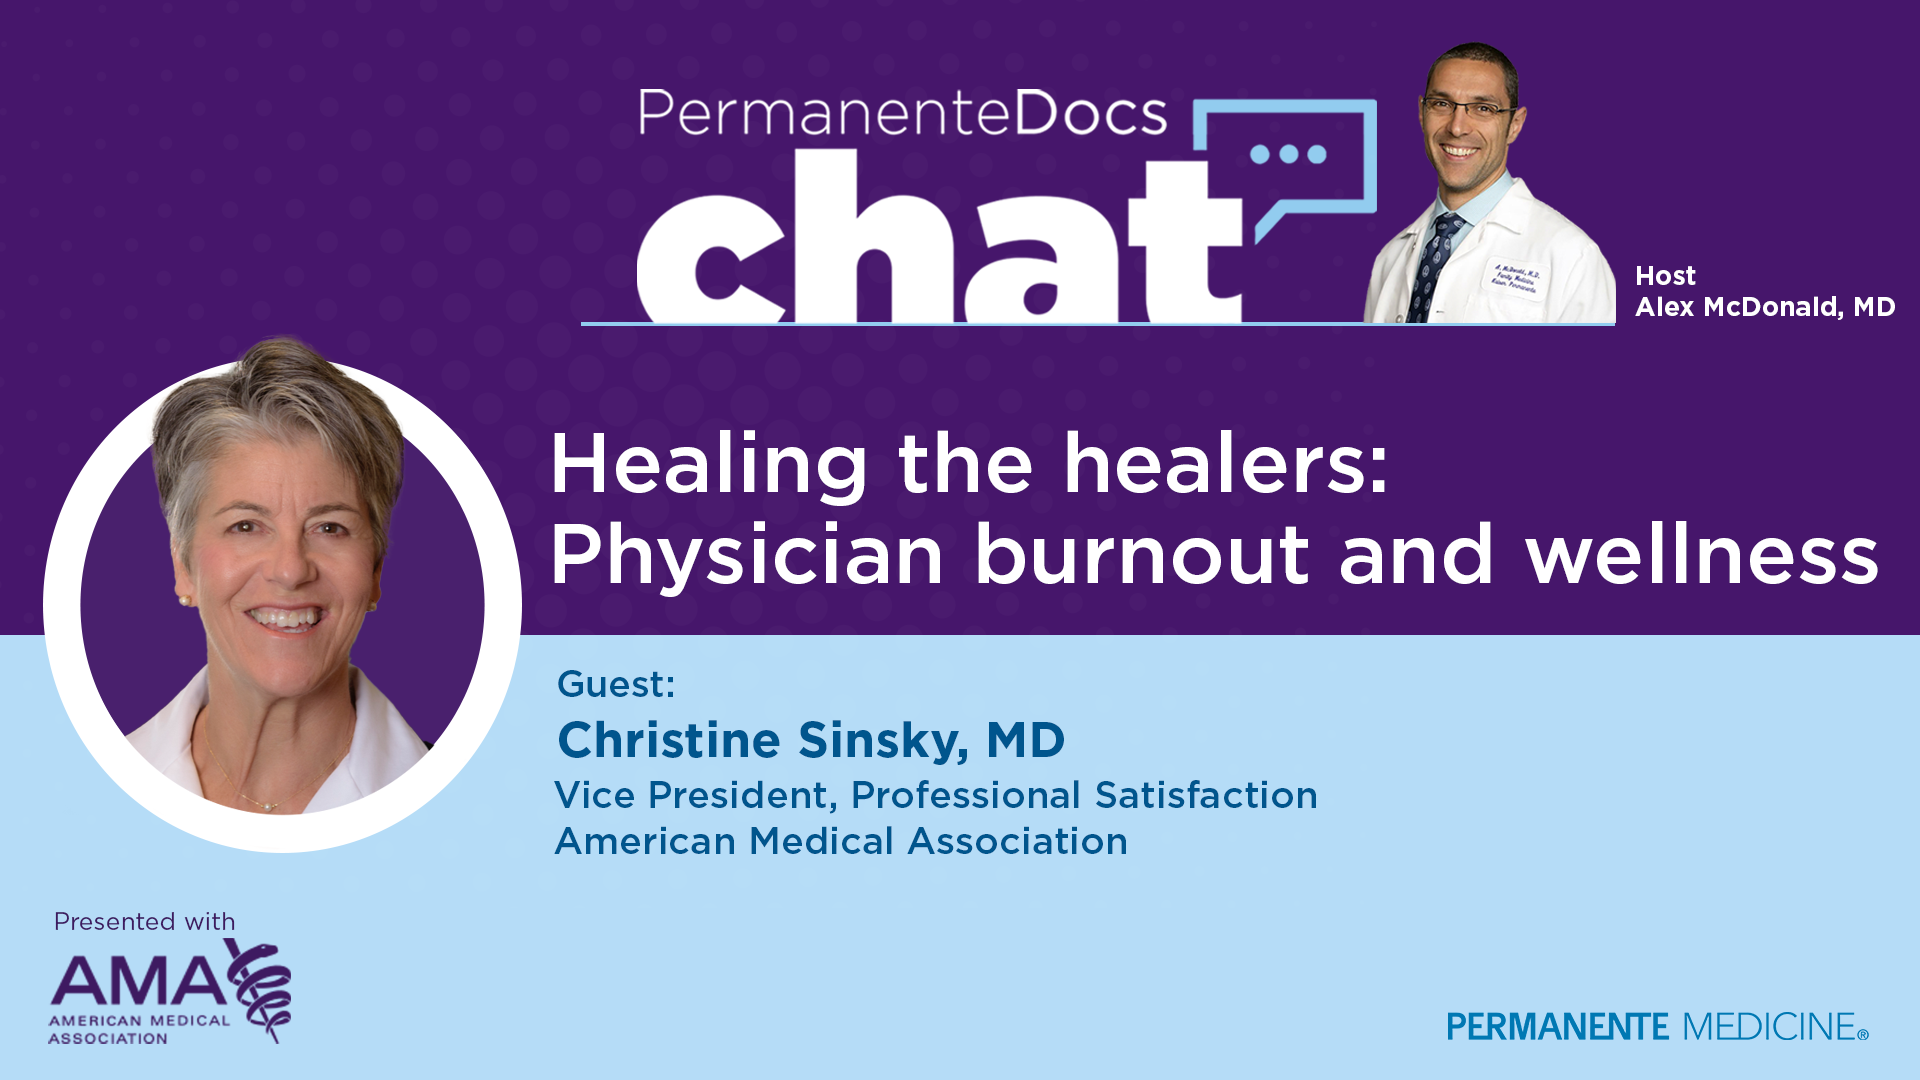 Addressing physician burnout and wellness